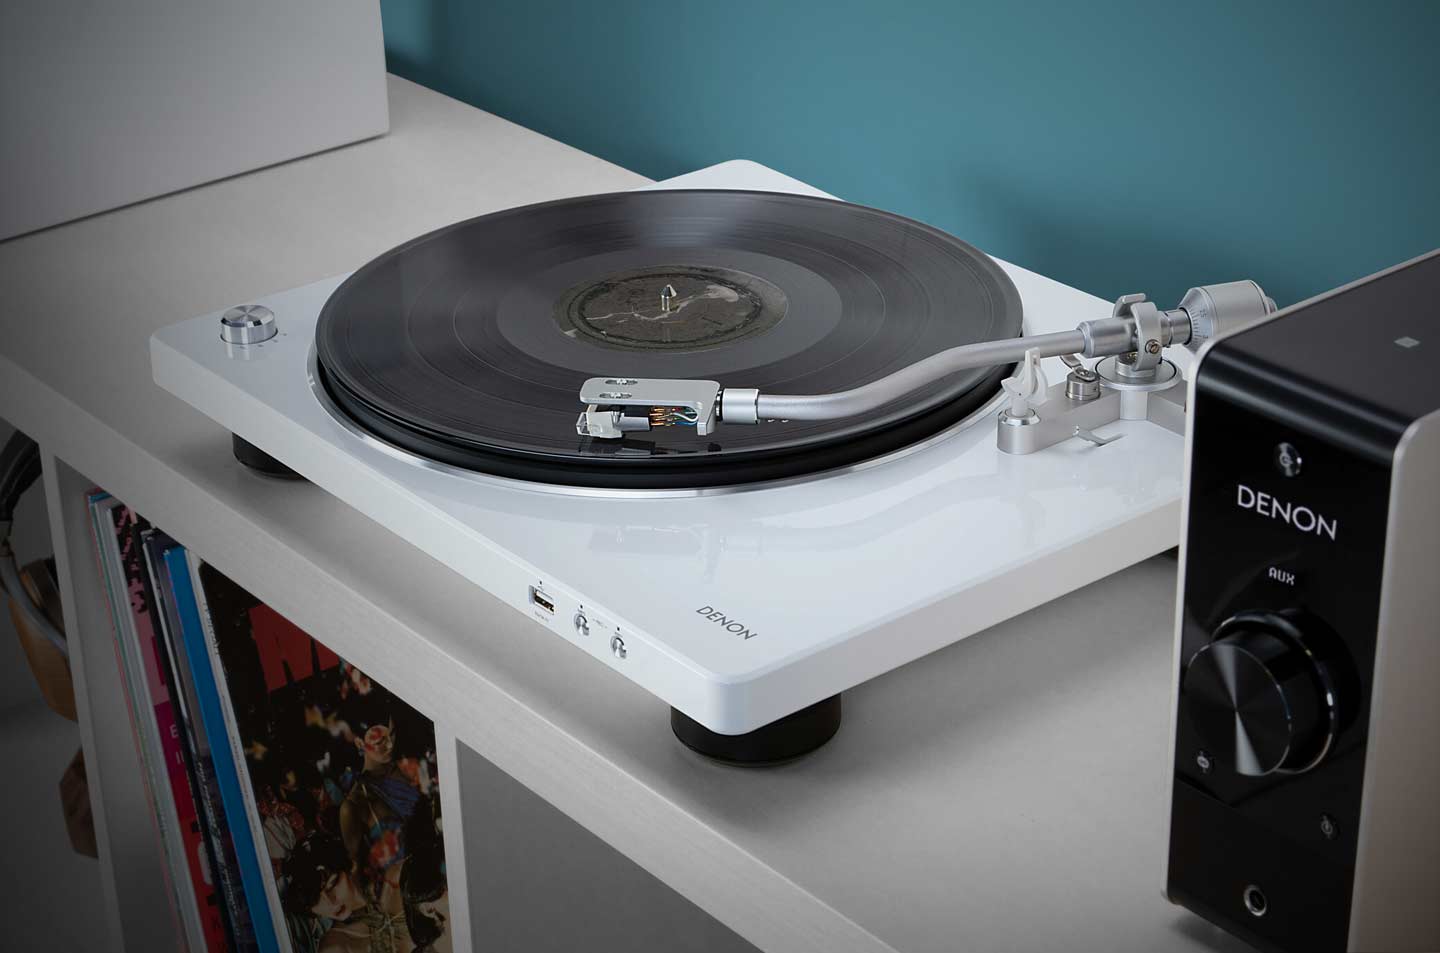 DP-200USB - Fully automatic turntable with USB port and built-in 